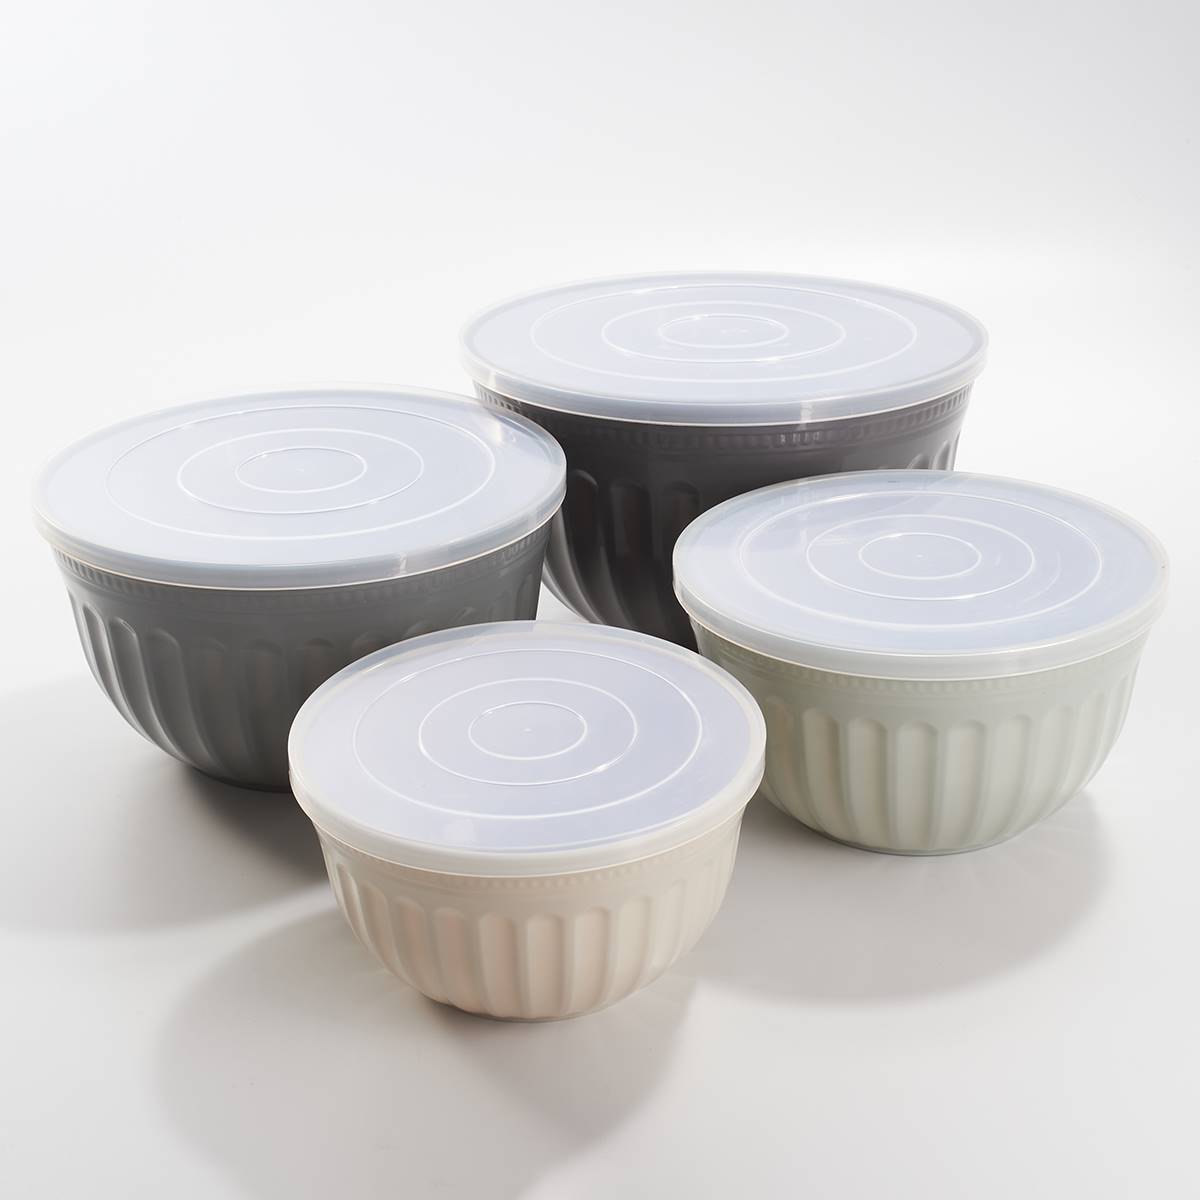 Scallop 4pc. Mixing Bowls With Lids - Grey Ombre